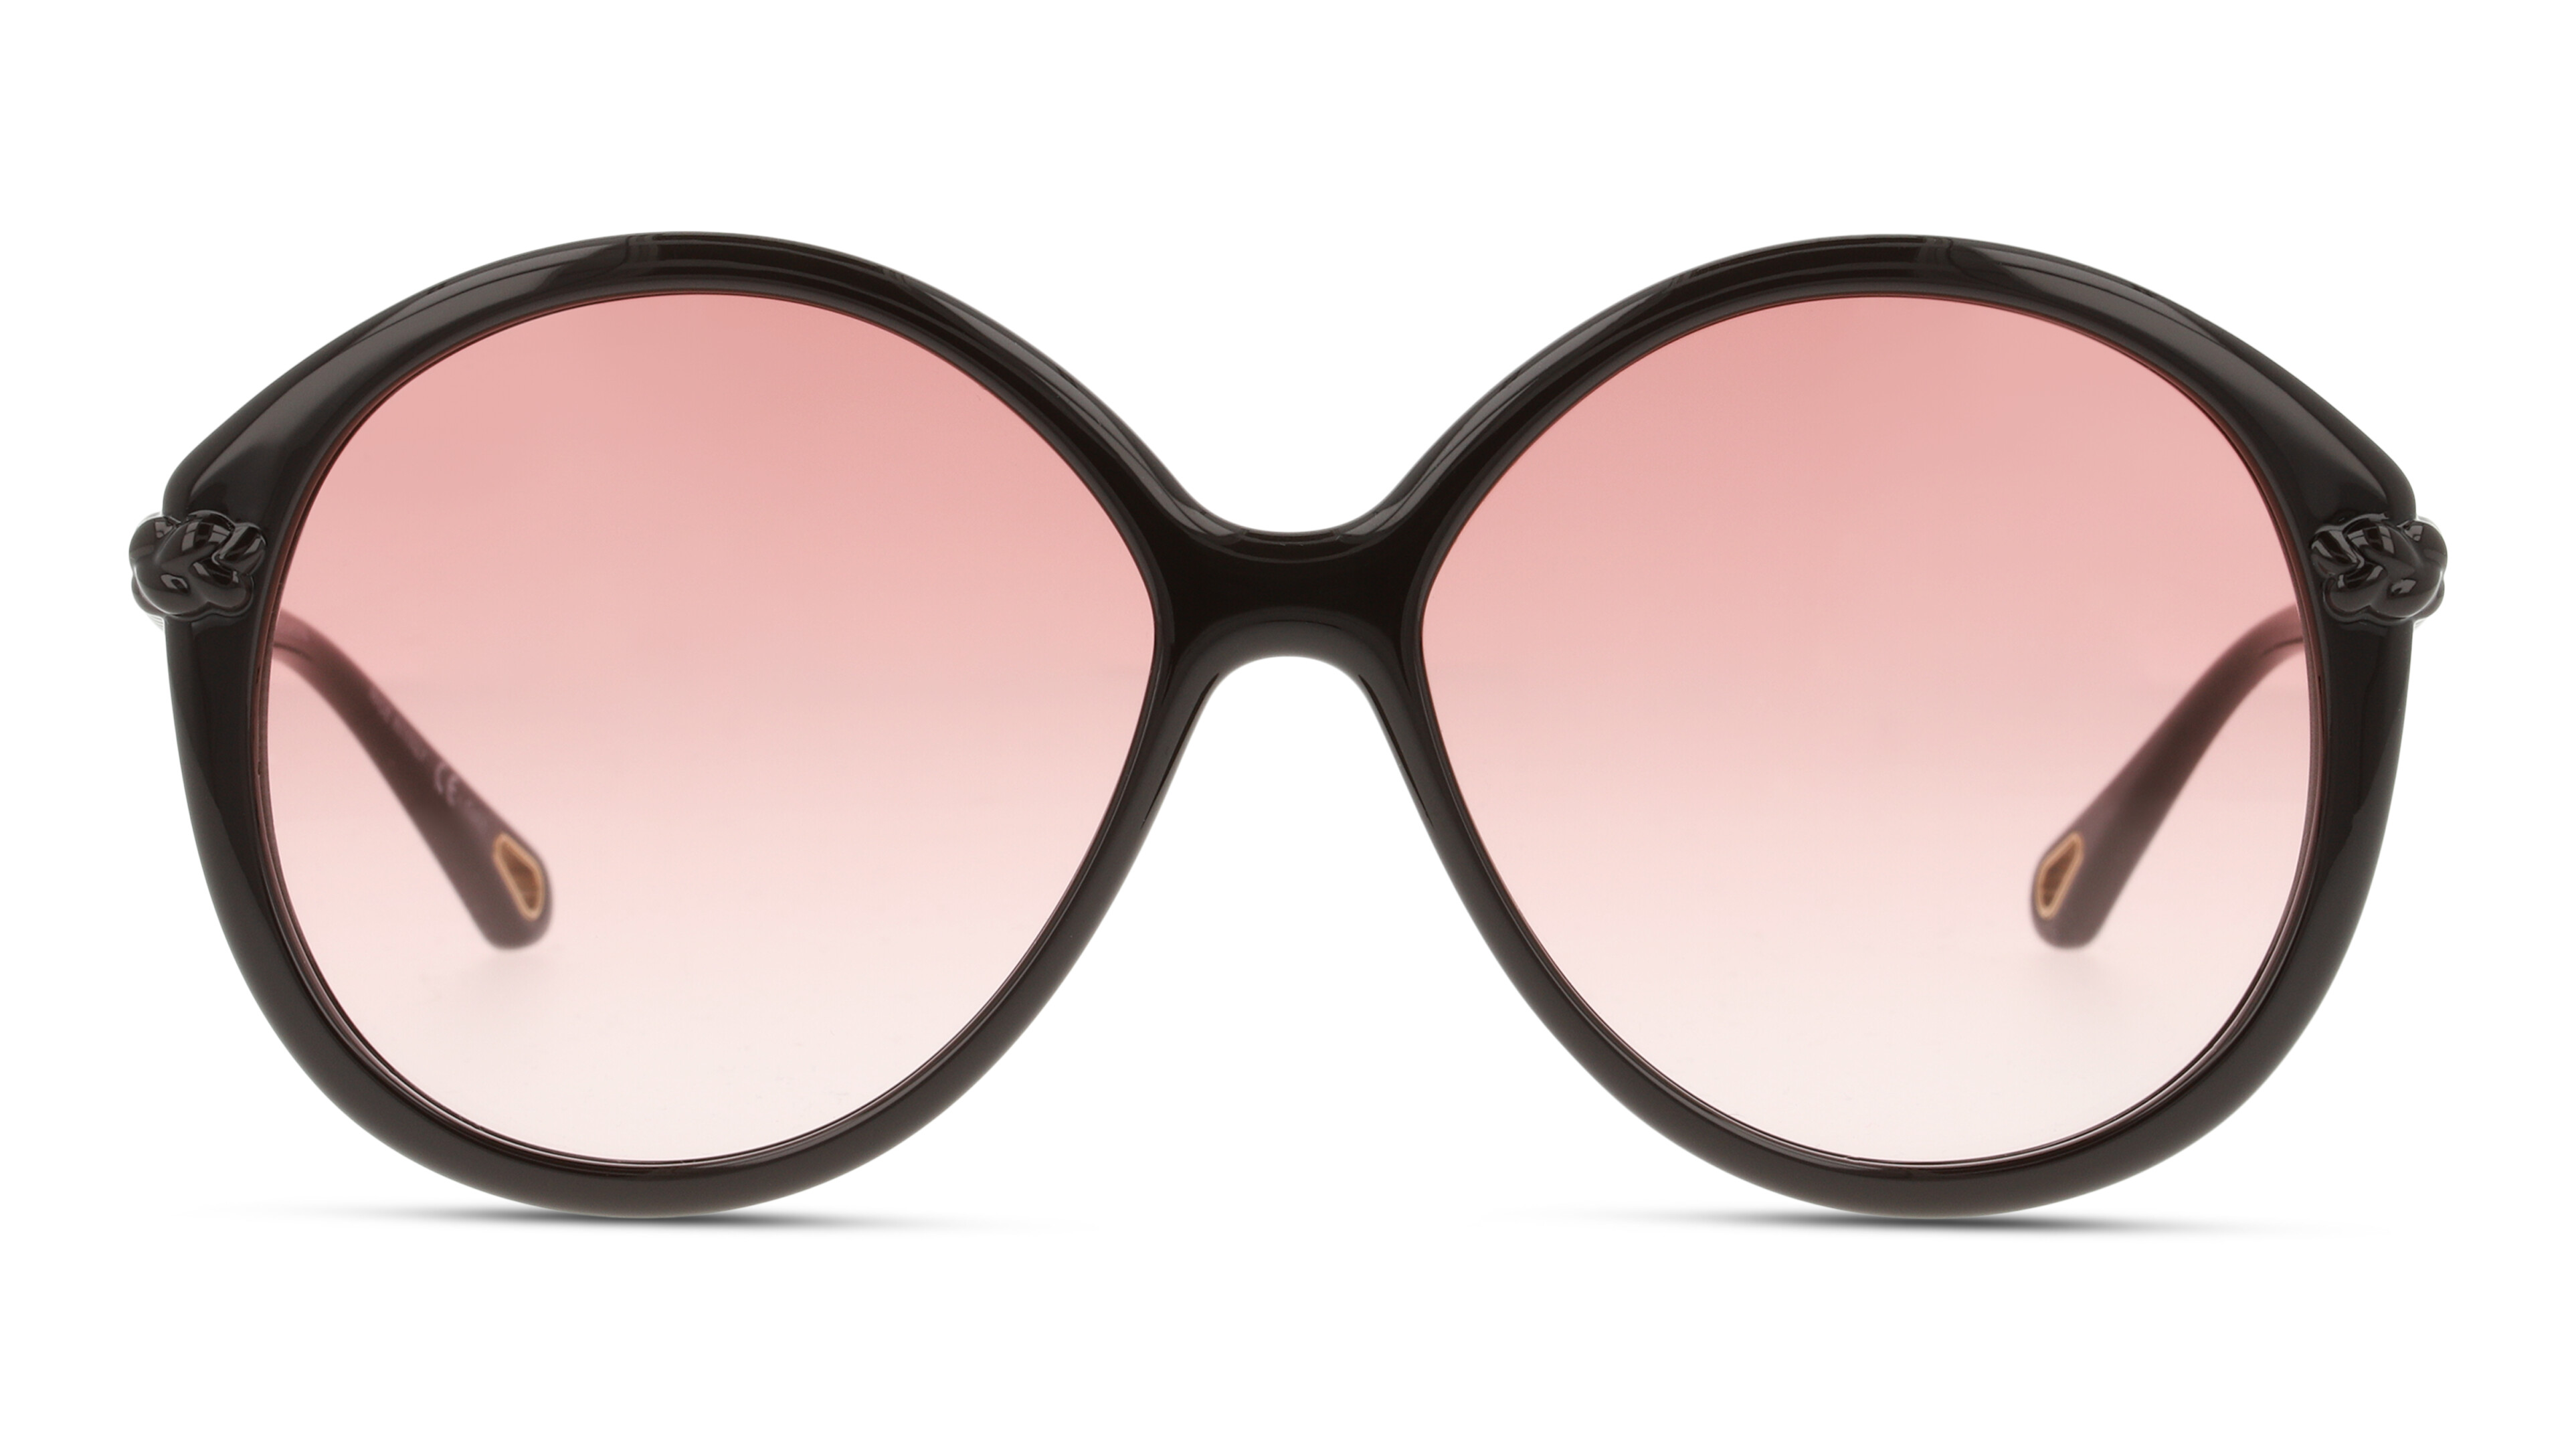 [products.image.front] Chloe CH0002S 001 Sonnenbrille